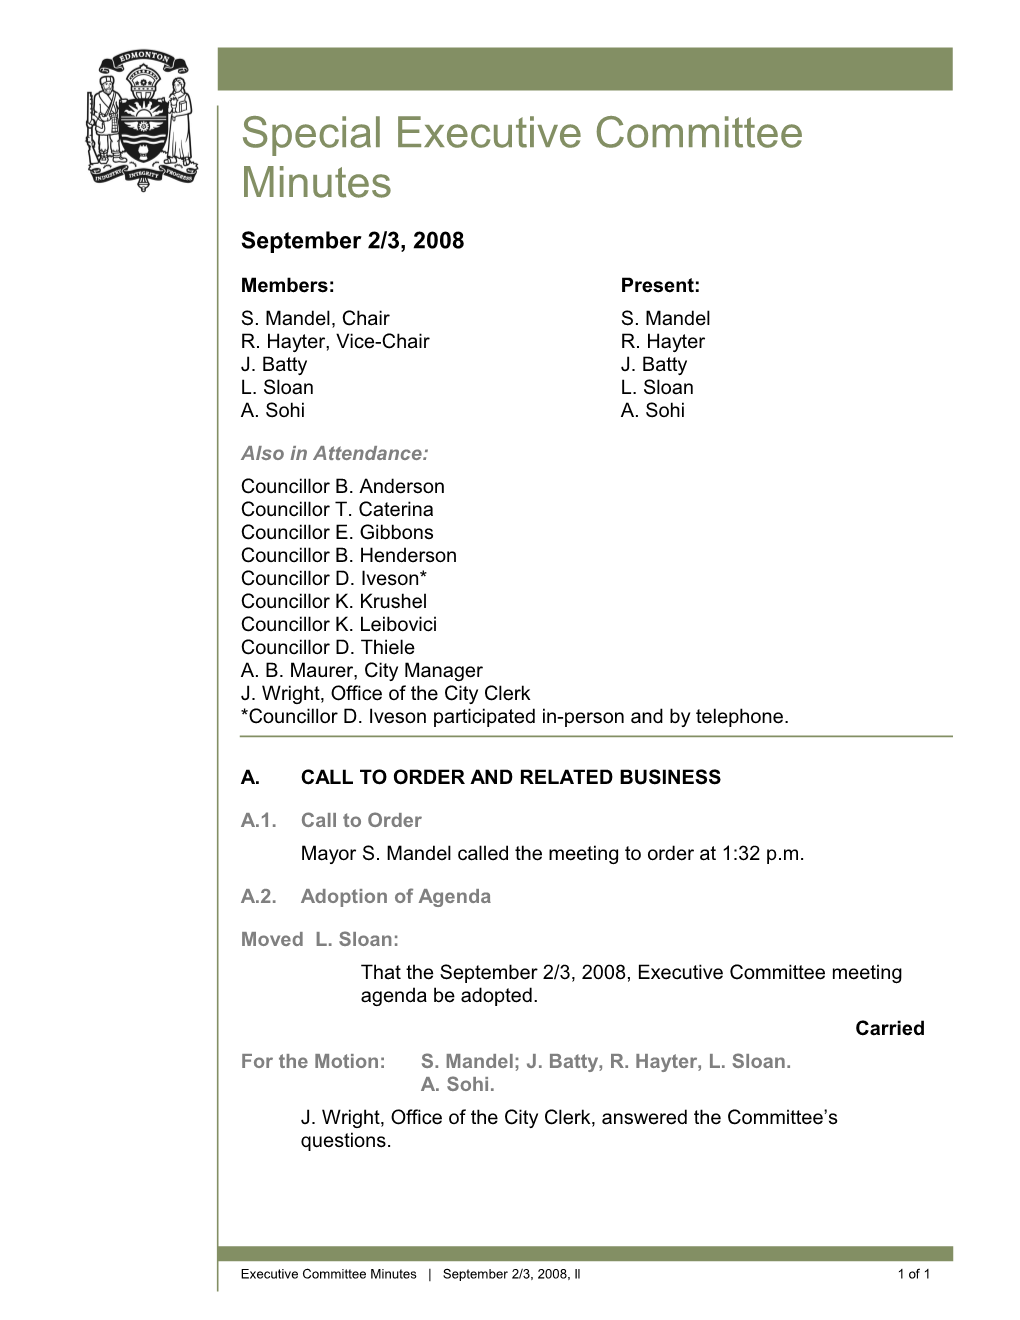 Minutes for Executive Committee September 2, 2008 Meeting